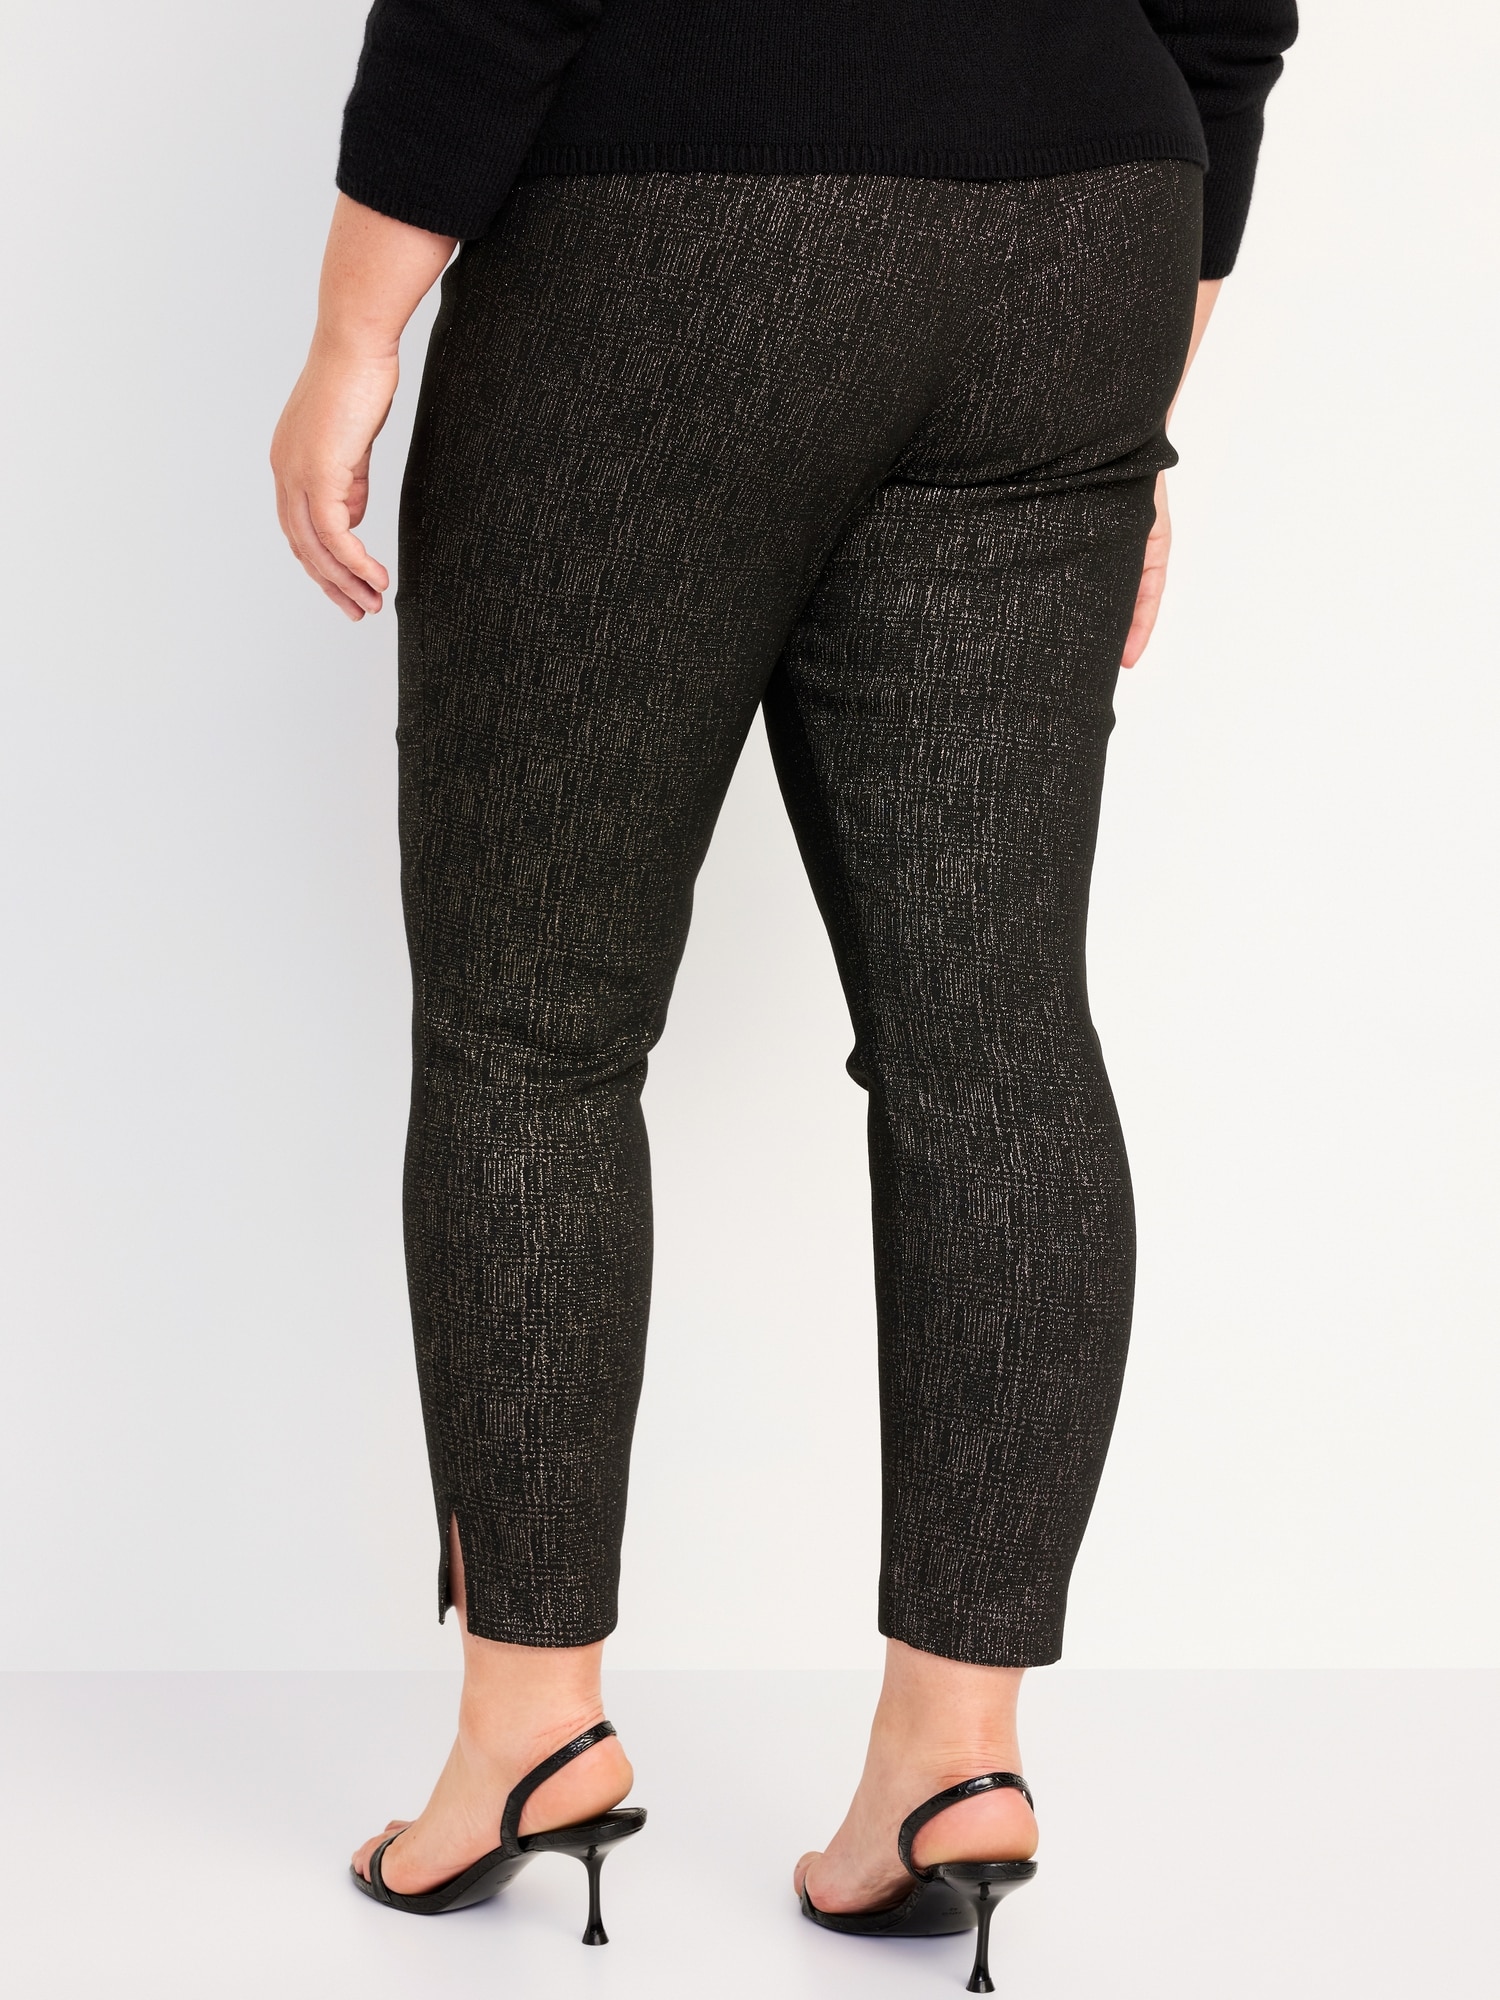 Old Navy High Waisted Skinny Pixie Ankle Pants Size 16- Black-NWT(S#551152)